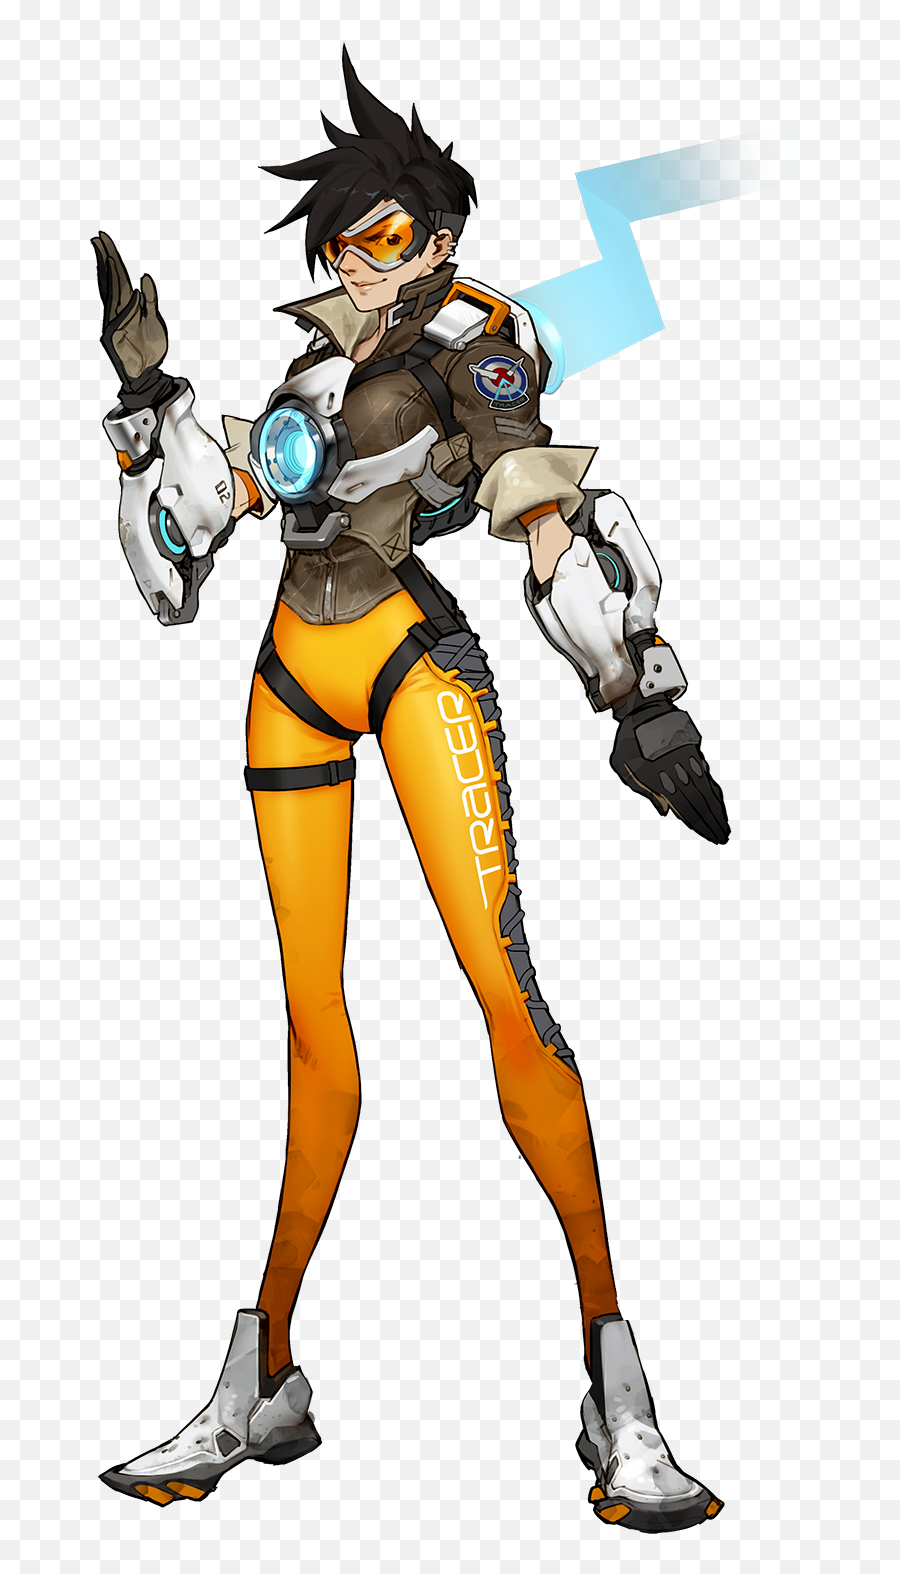 Overwatch Tracer Png 8 Image - Tracer Overwatch Concept Art,Overwatch Tracer Png